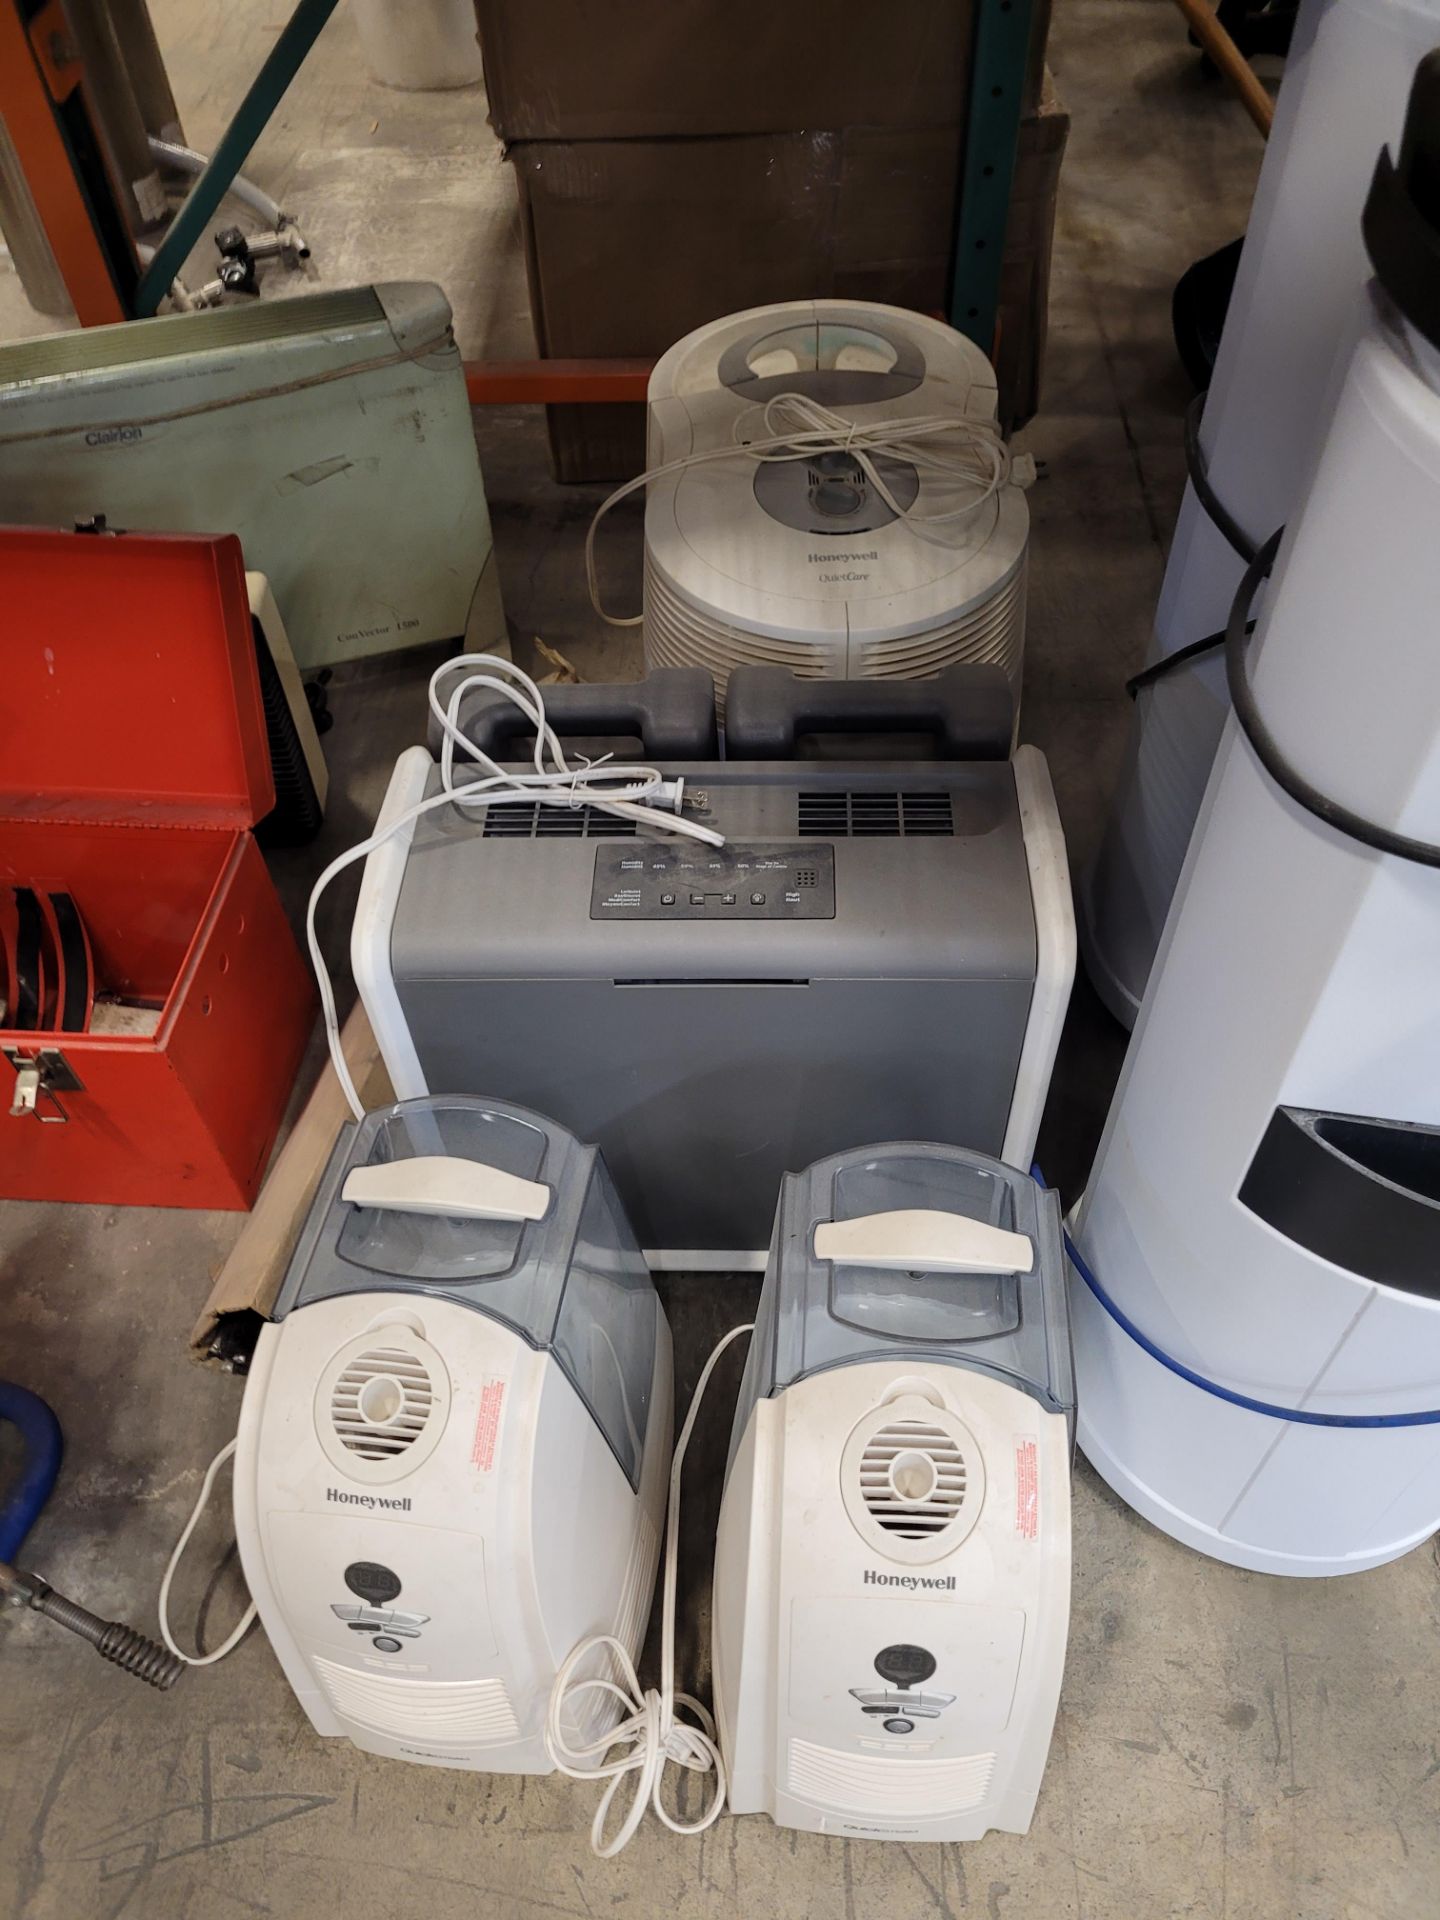 Lot of (7) water coolers with water lines, (4) HONEYWELL & (1) assorted humidifiers - Image 2 of 4